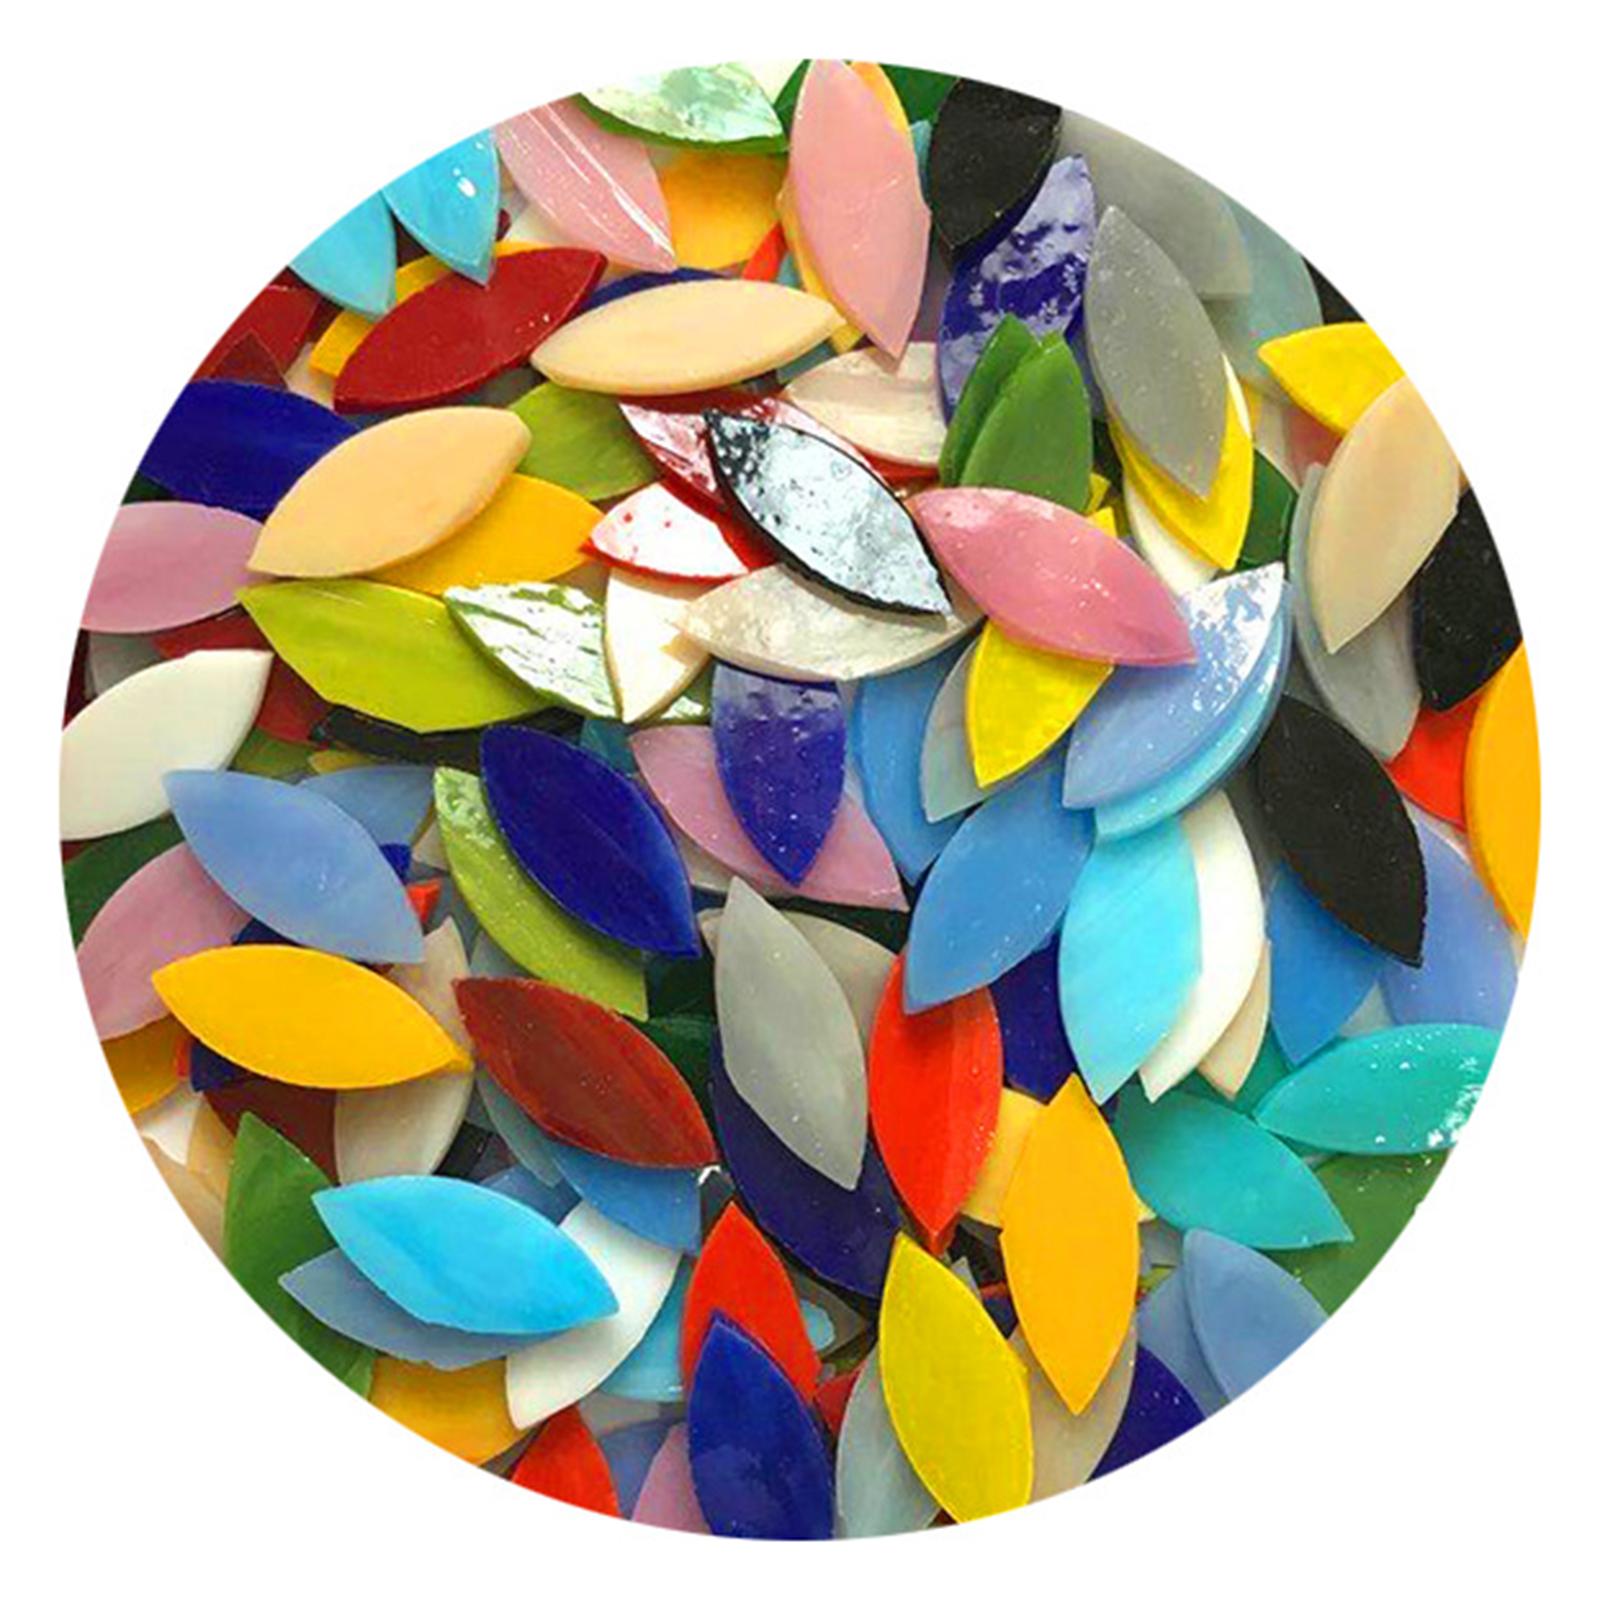 100x Mosaic Tiles for Crafts Bulk Stained Glass Supplies Crafts Petal  Leaves Mosaic Stained Glass Pieces for Home Decoration or crafts 